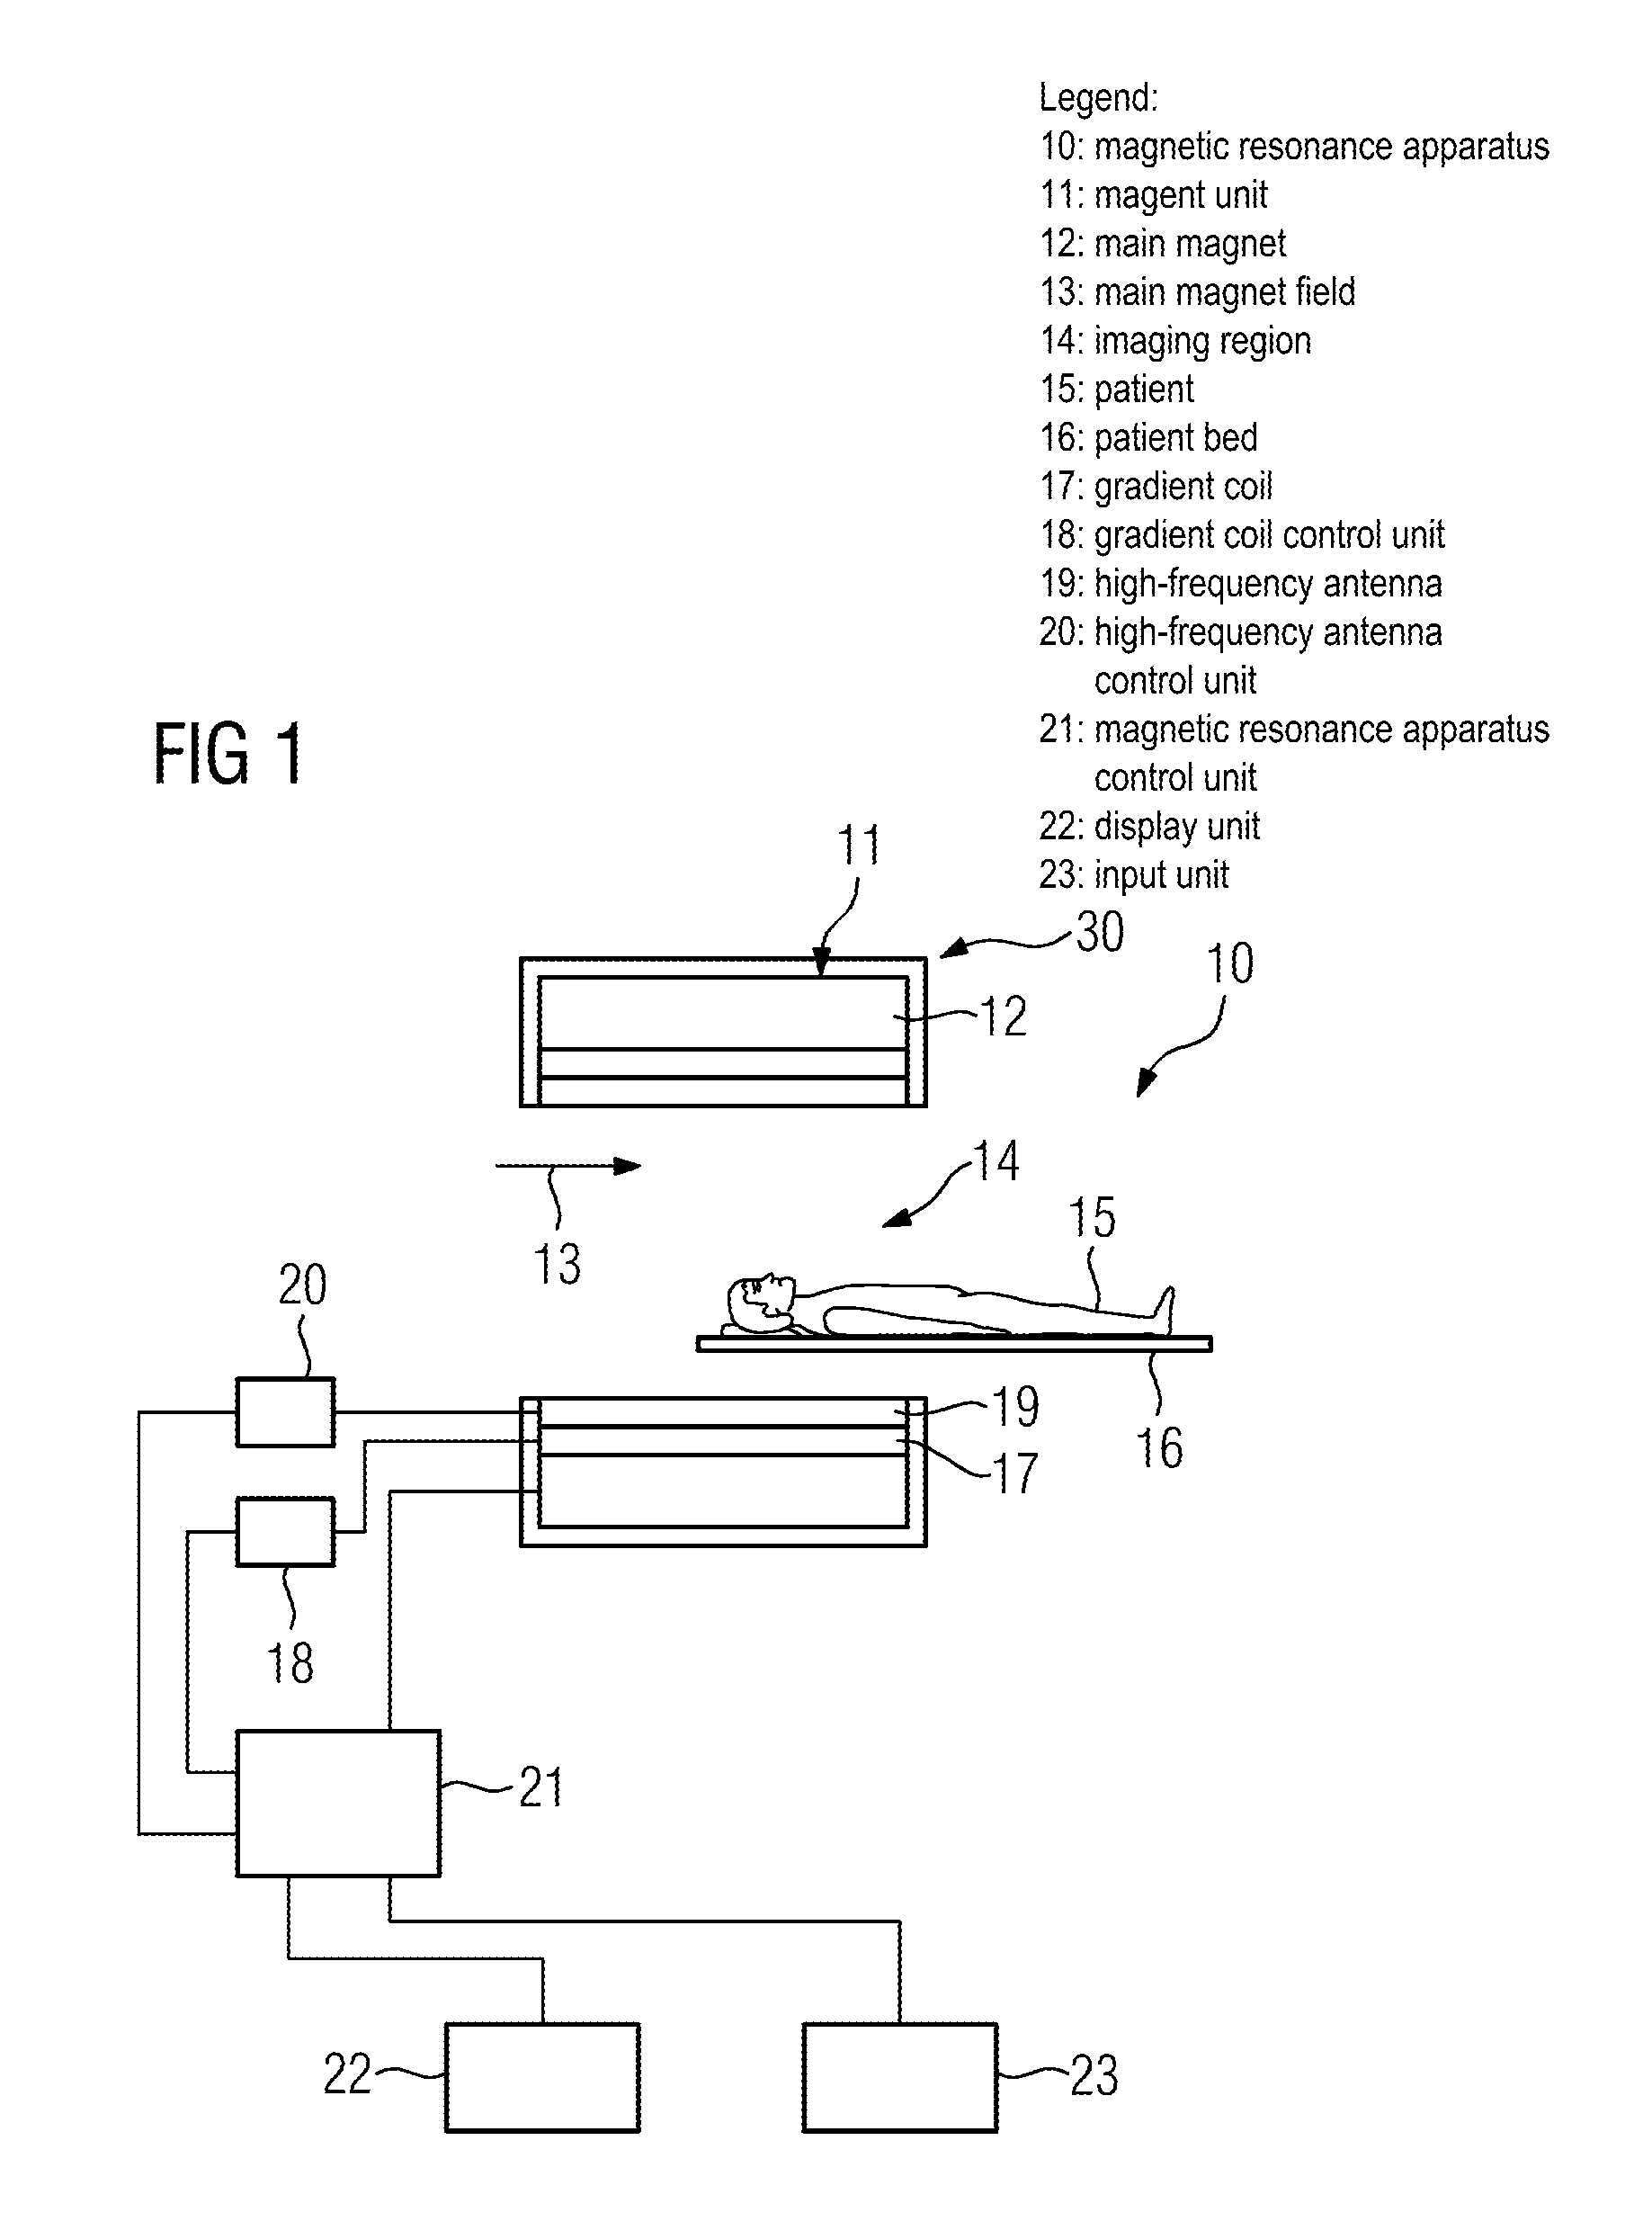 Magnetic resonance apparatus with sound absorption cladding and irregular grid